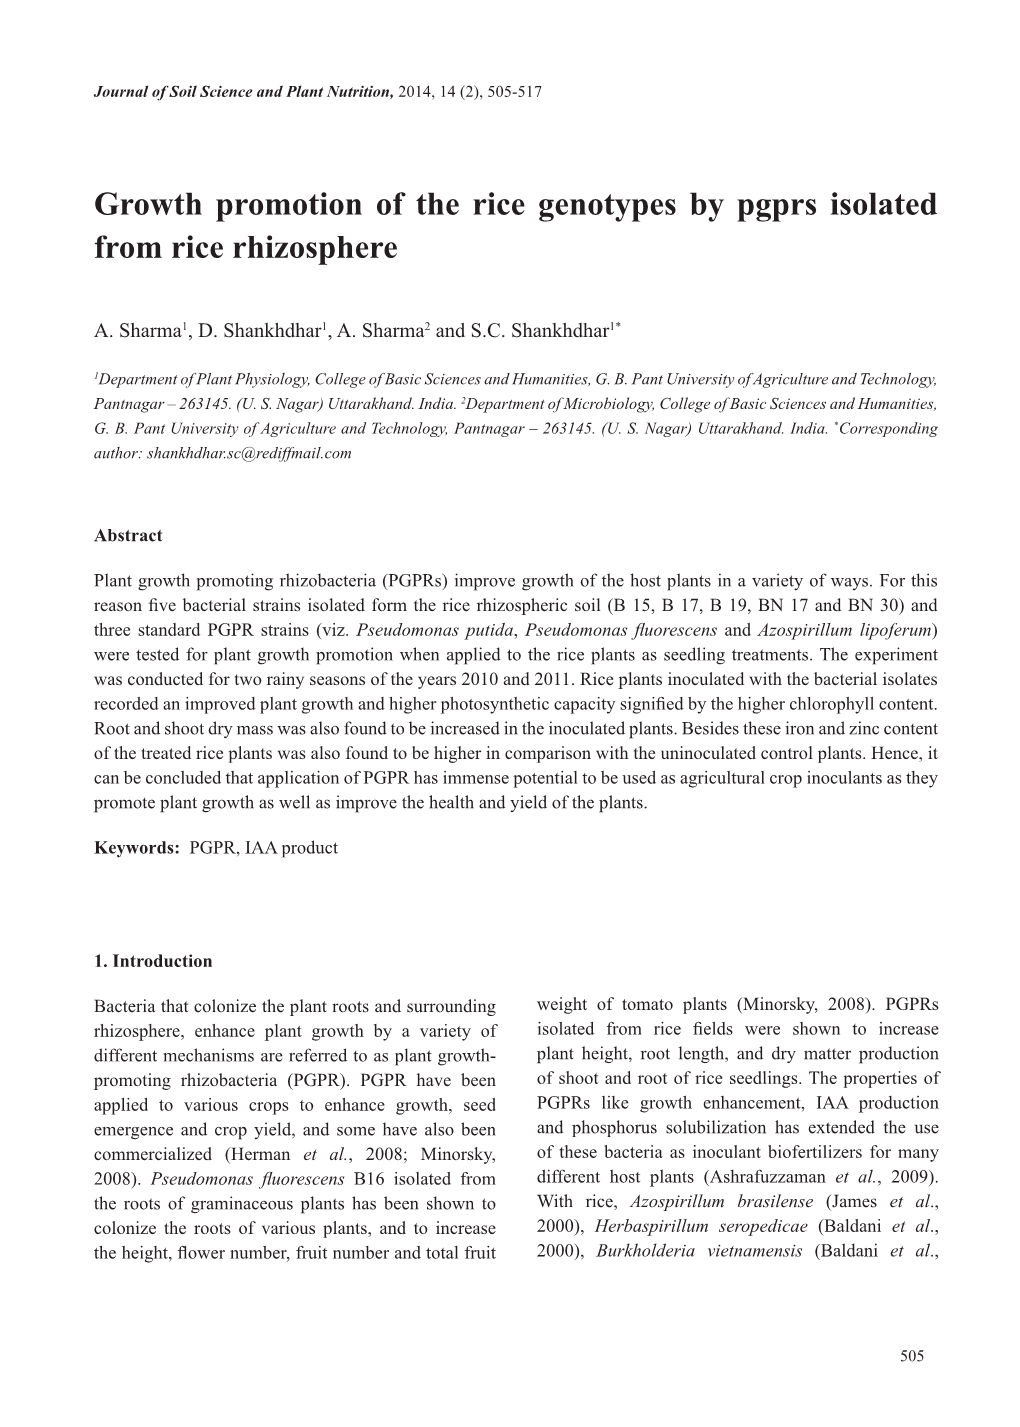 Growth Promotion of the Rice Genotypes by Pgprs Isolated from Rice Rhizosphere